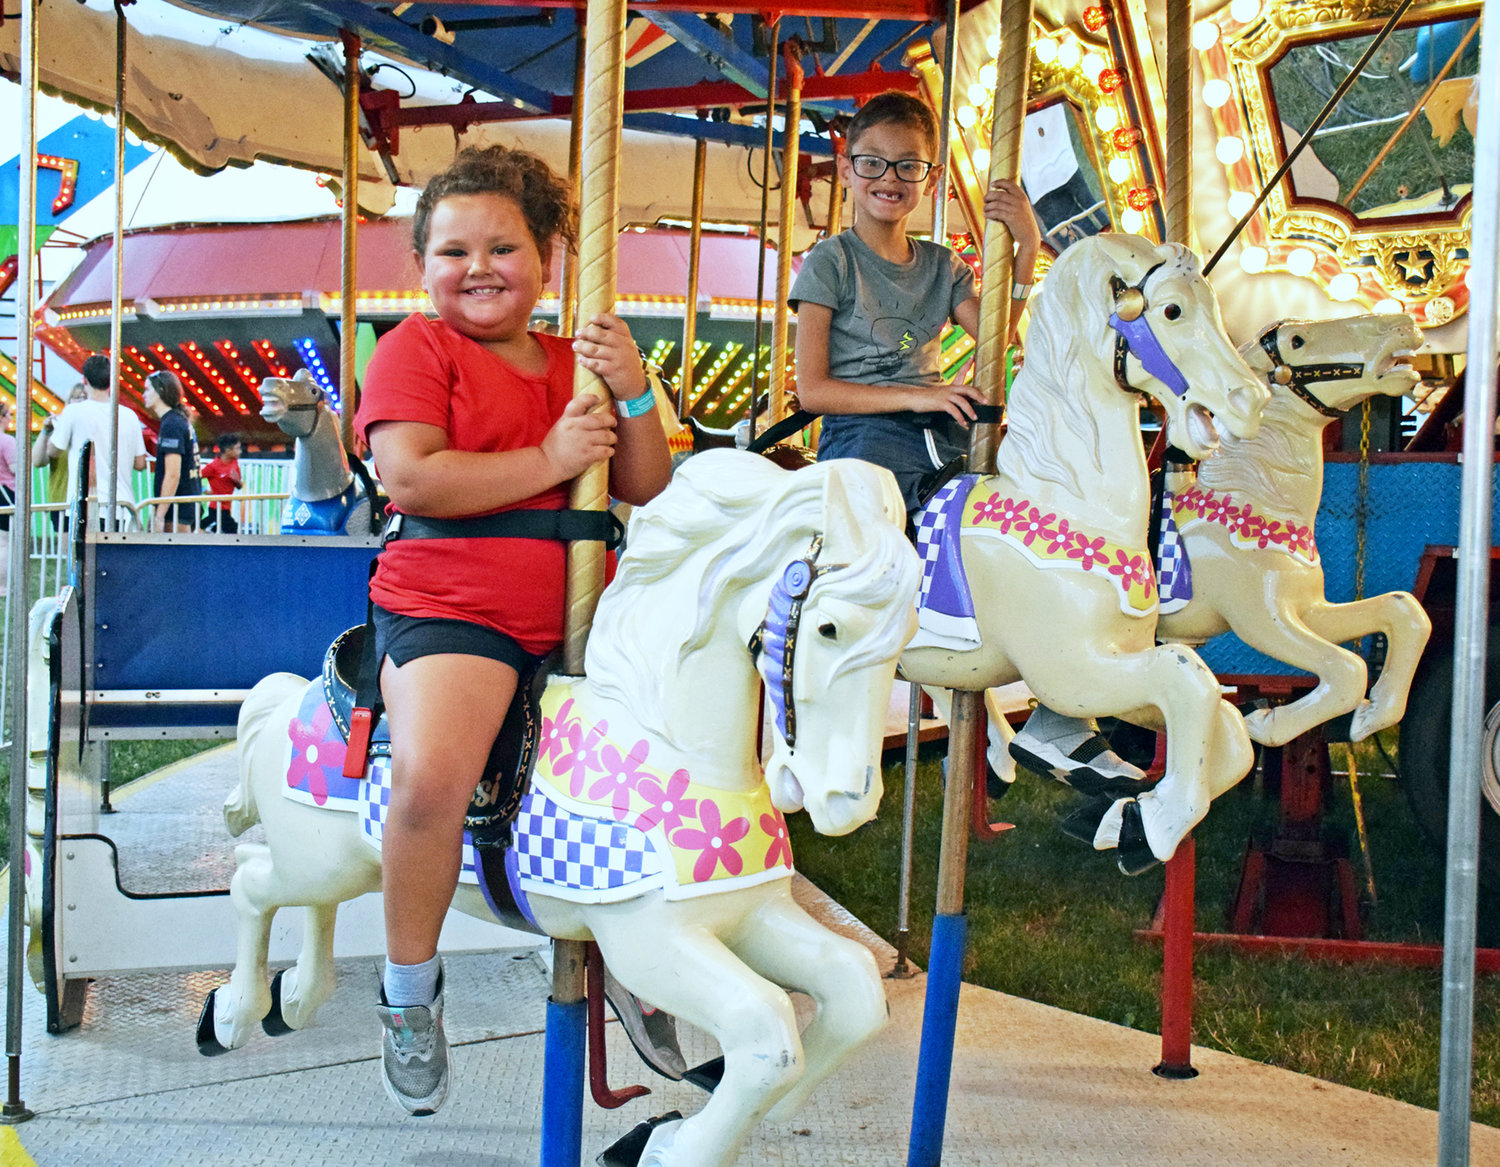 Jayla and Bently Shelton of Doylestown ride the ponies on the carousel.